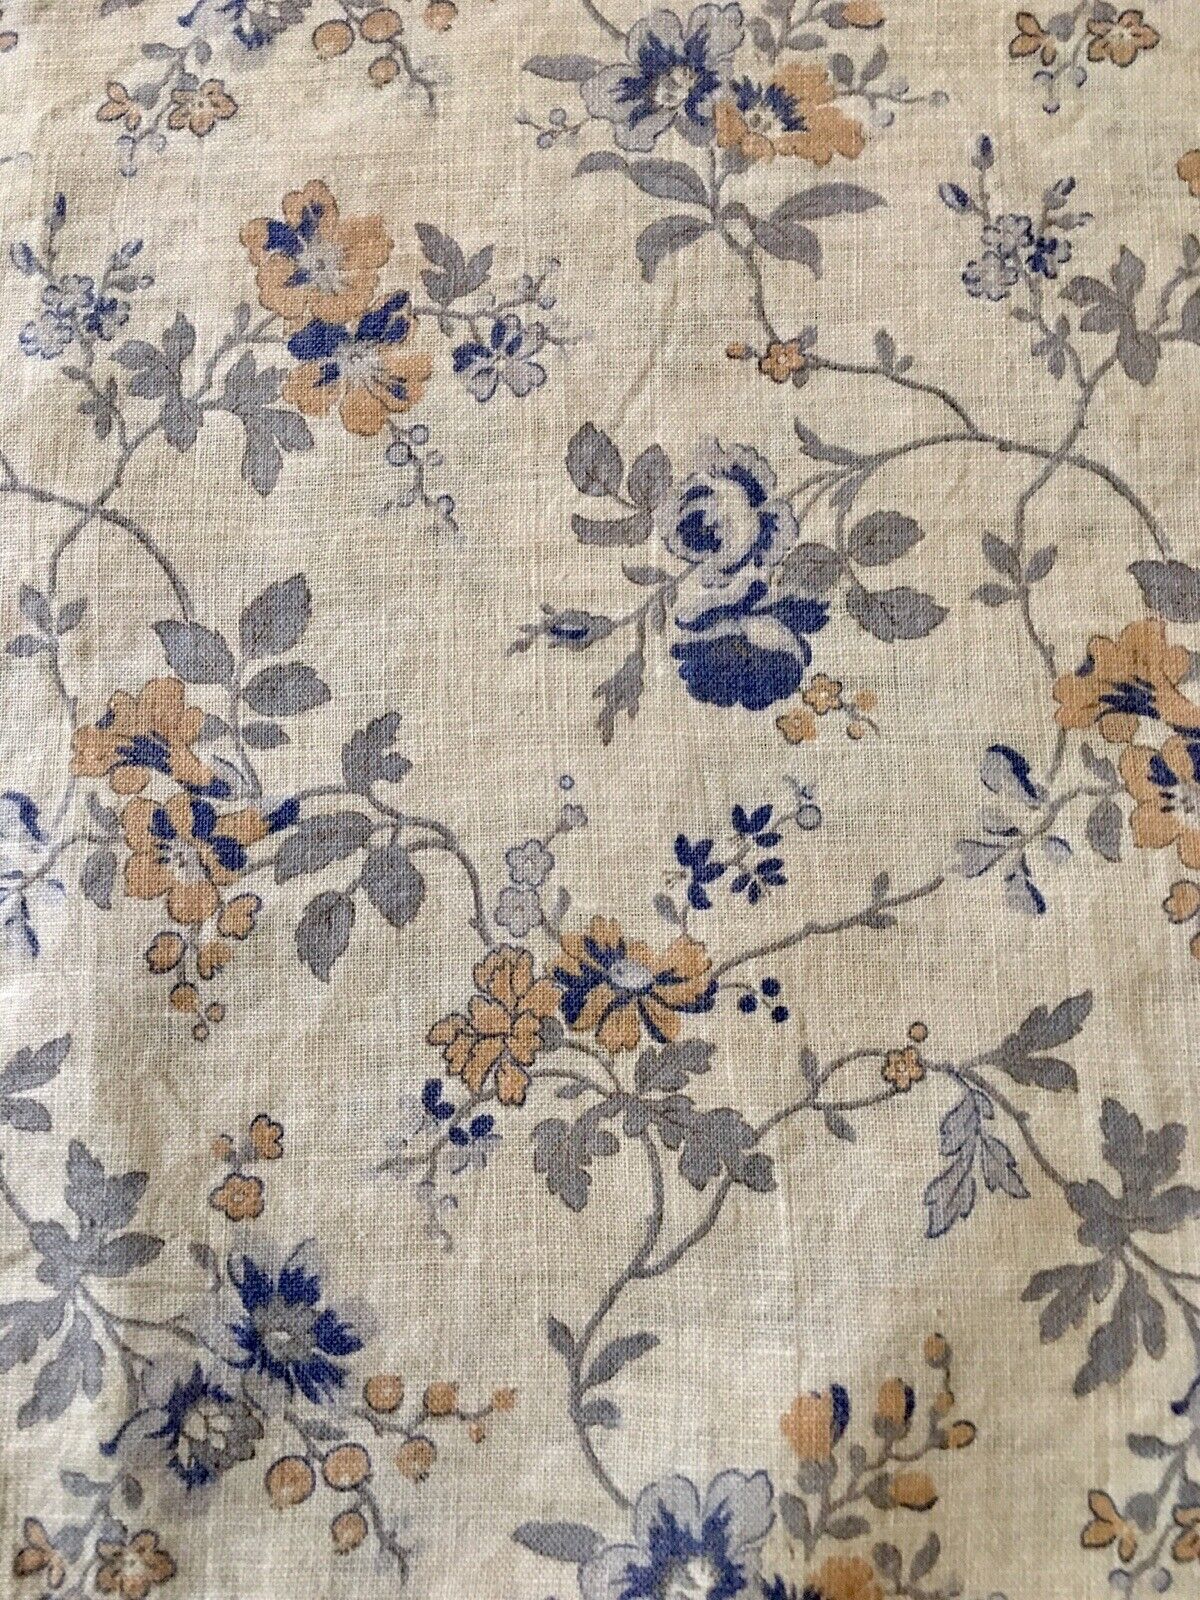 Antique French 19th Century Floral Roses Cotton Fabric ~Blue Gray Ochre Yellow